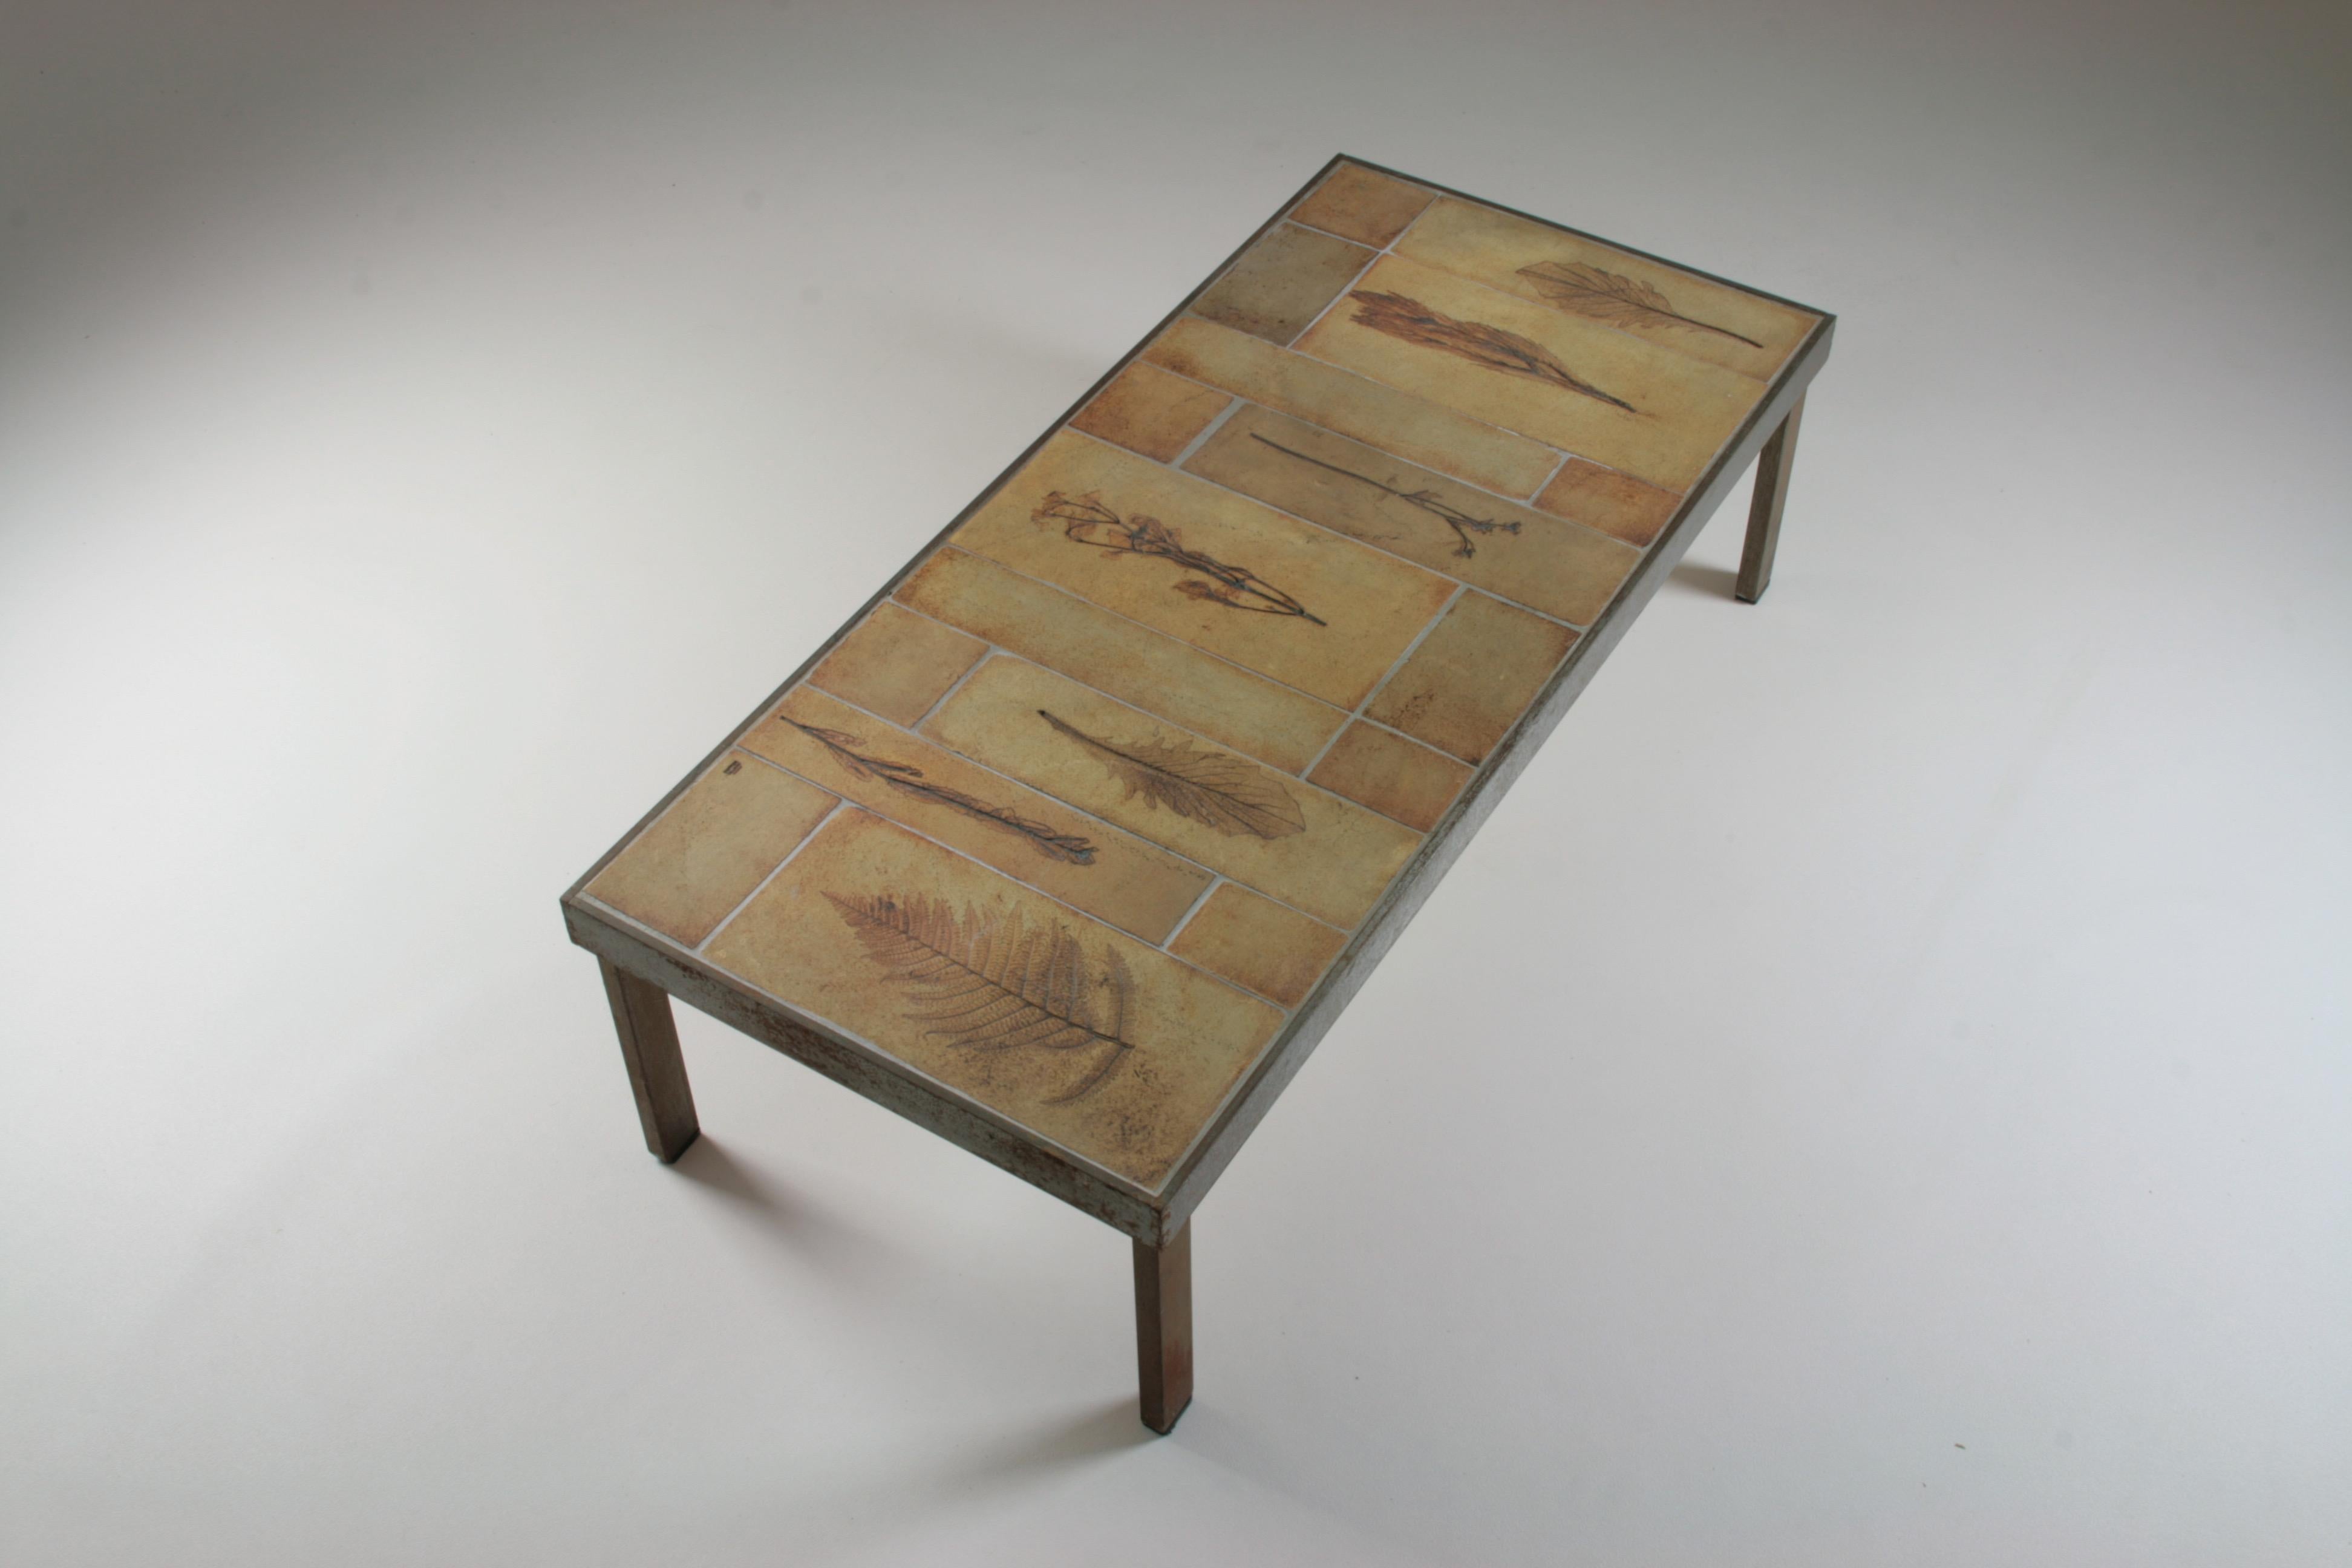 Garrigue rectangular coffee table by roger capron in vallauris, france and dating from the 1960s. Metal structure and legs with a ceramic top with inlaid herbarium motifs. All ceramics are in good condition and the metal is patinated as seen in all